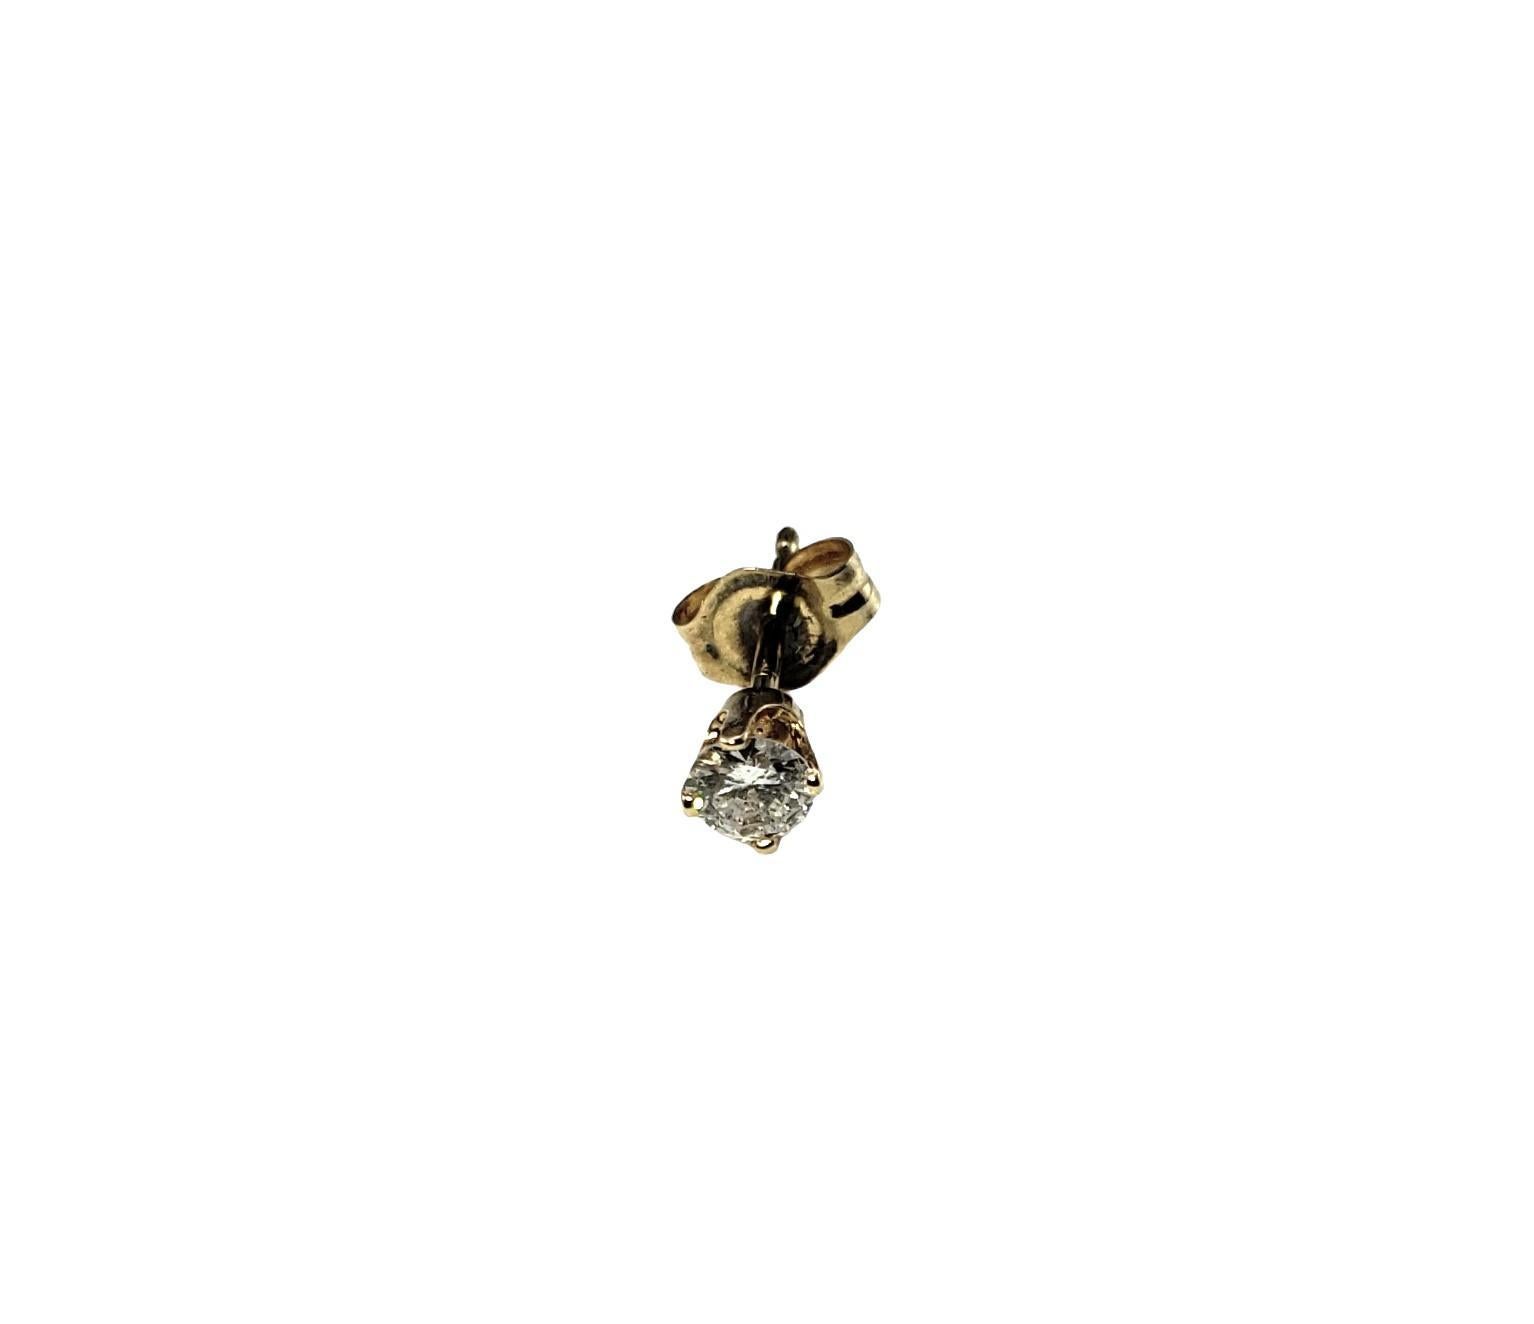 Vintage 14 Karat Yellow Gold Single Diamond Stud Earring-

This sparkling single stud earring features one round brilliant cut diamond set in classic 14K yellow gold.  Push back closure.

Approximate total diamond weight: .13 ct.

Diamond color: 